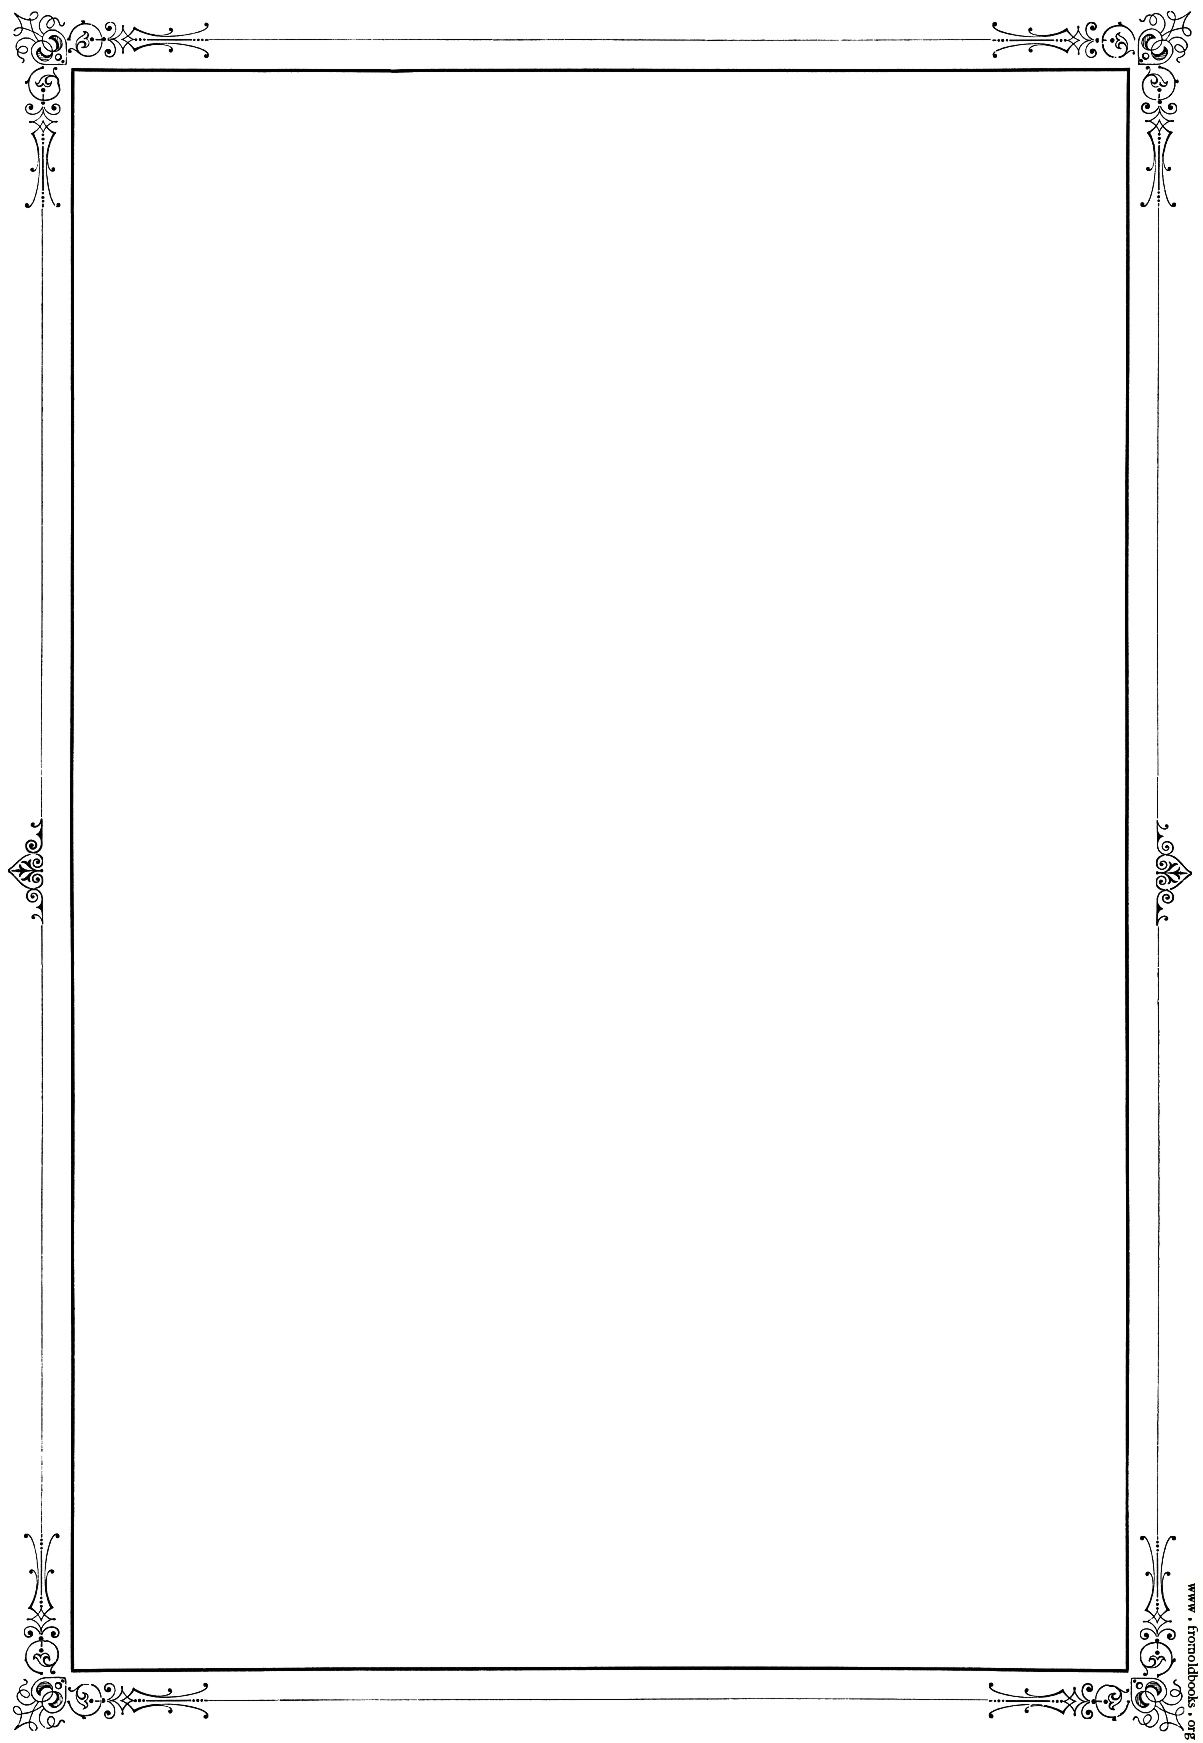 Free Simple Page Border Designs Download Free Simple Page Border